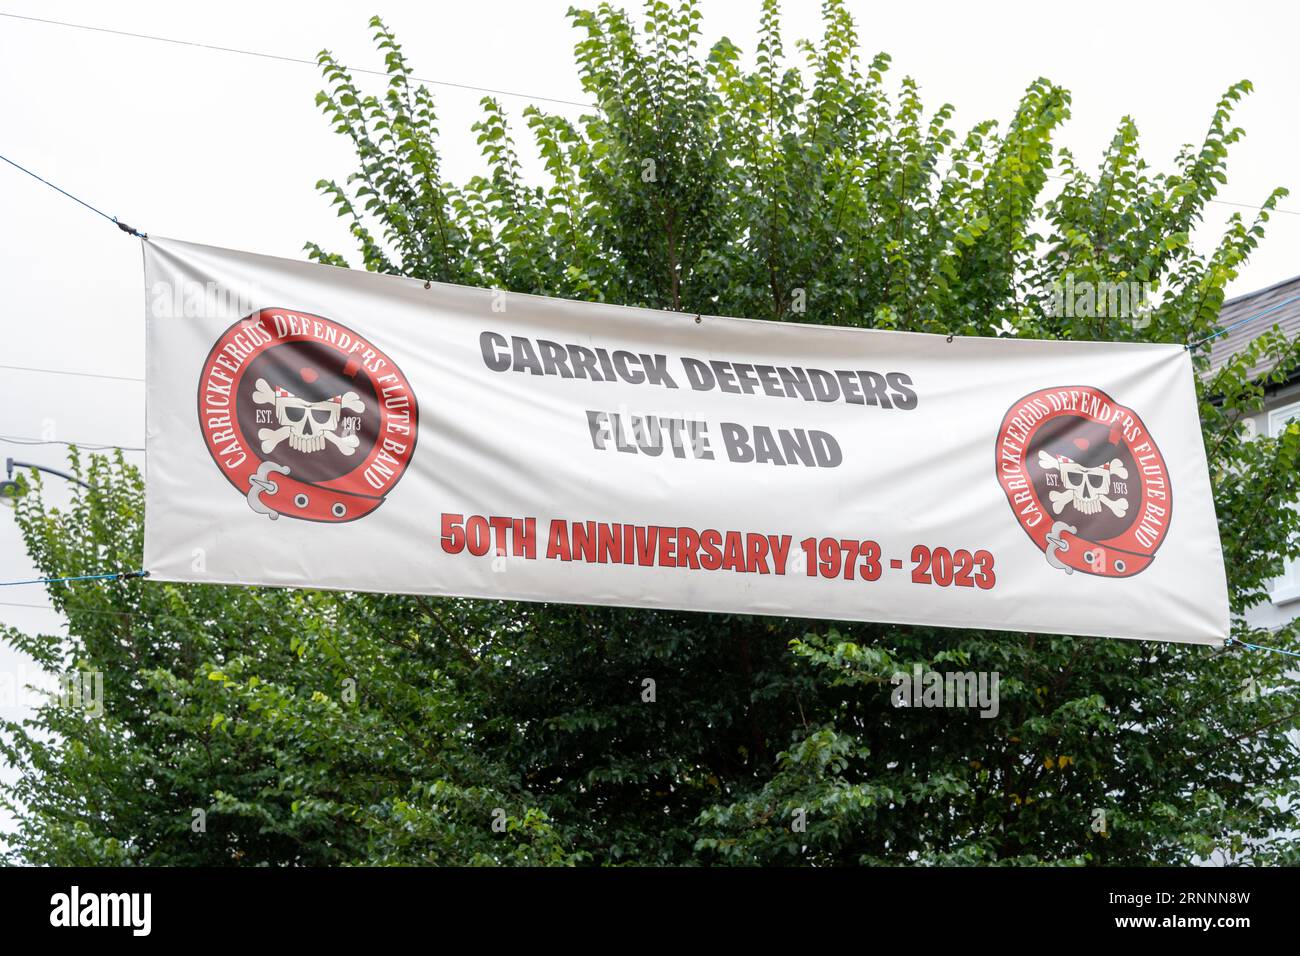 A banner hung across the street in Carrickfergus, northern Ireland advertises the 50th anniversary of the Carrickfergus Defenders Flute Band Stock Photo